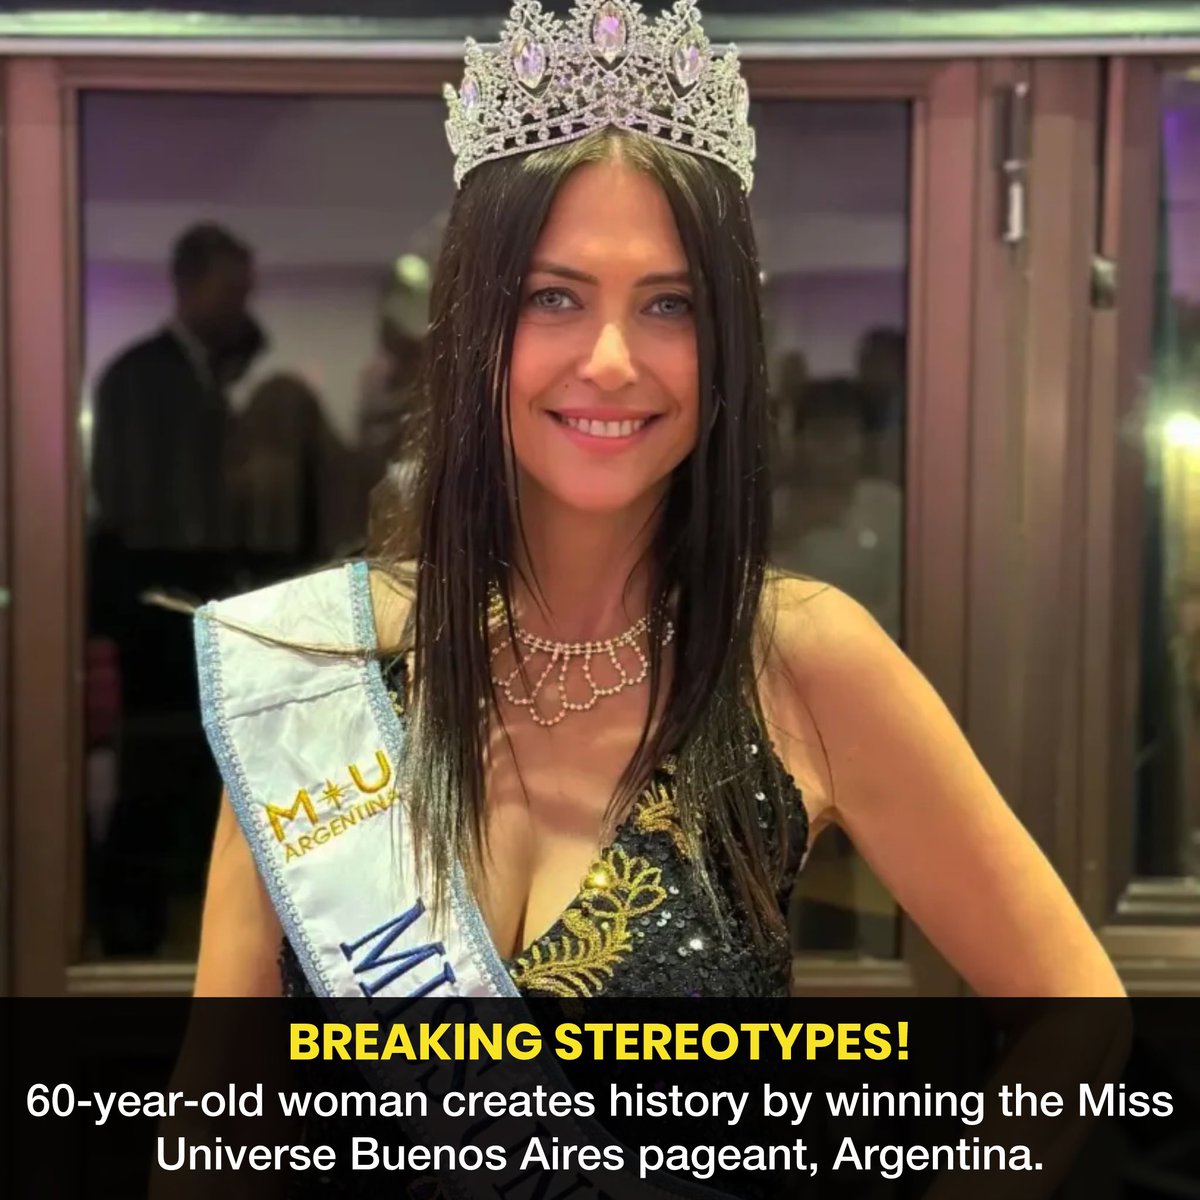 Alejandra Marisa Rodriguez, a 60-year-old woman, defied expectations and made history by winning the prestigious Miss Universe title for the Buenos Aires province in Argentina. 

#nonextquestion